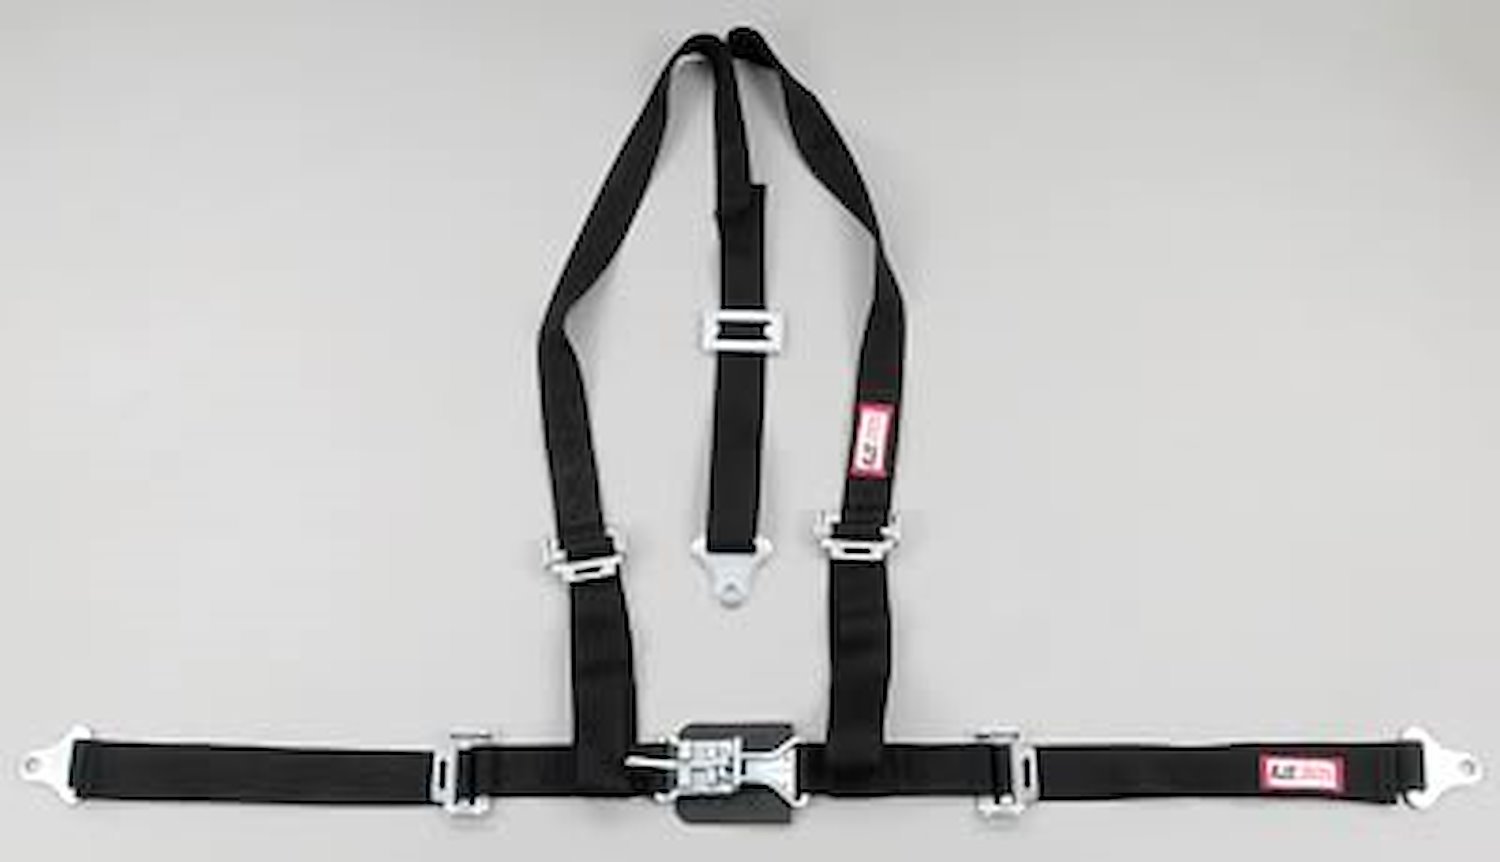 NON-SFI L&L HARNESS 3 PULL UP Lap BELT SNAP SEWN IN 2 S.H. Y FLOOR Mount w/STERNUM STRAP WRAP/SNAP RED